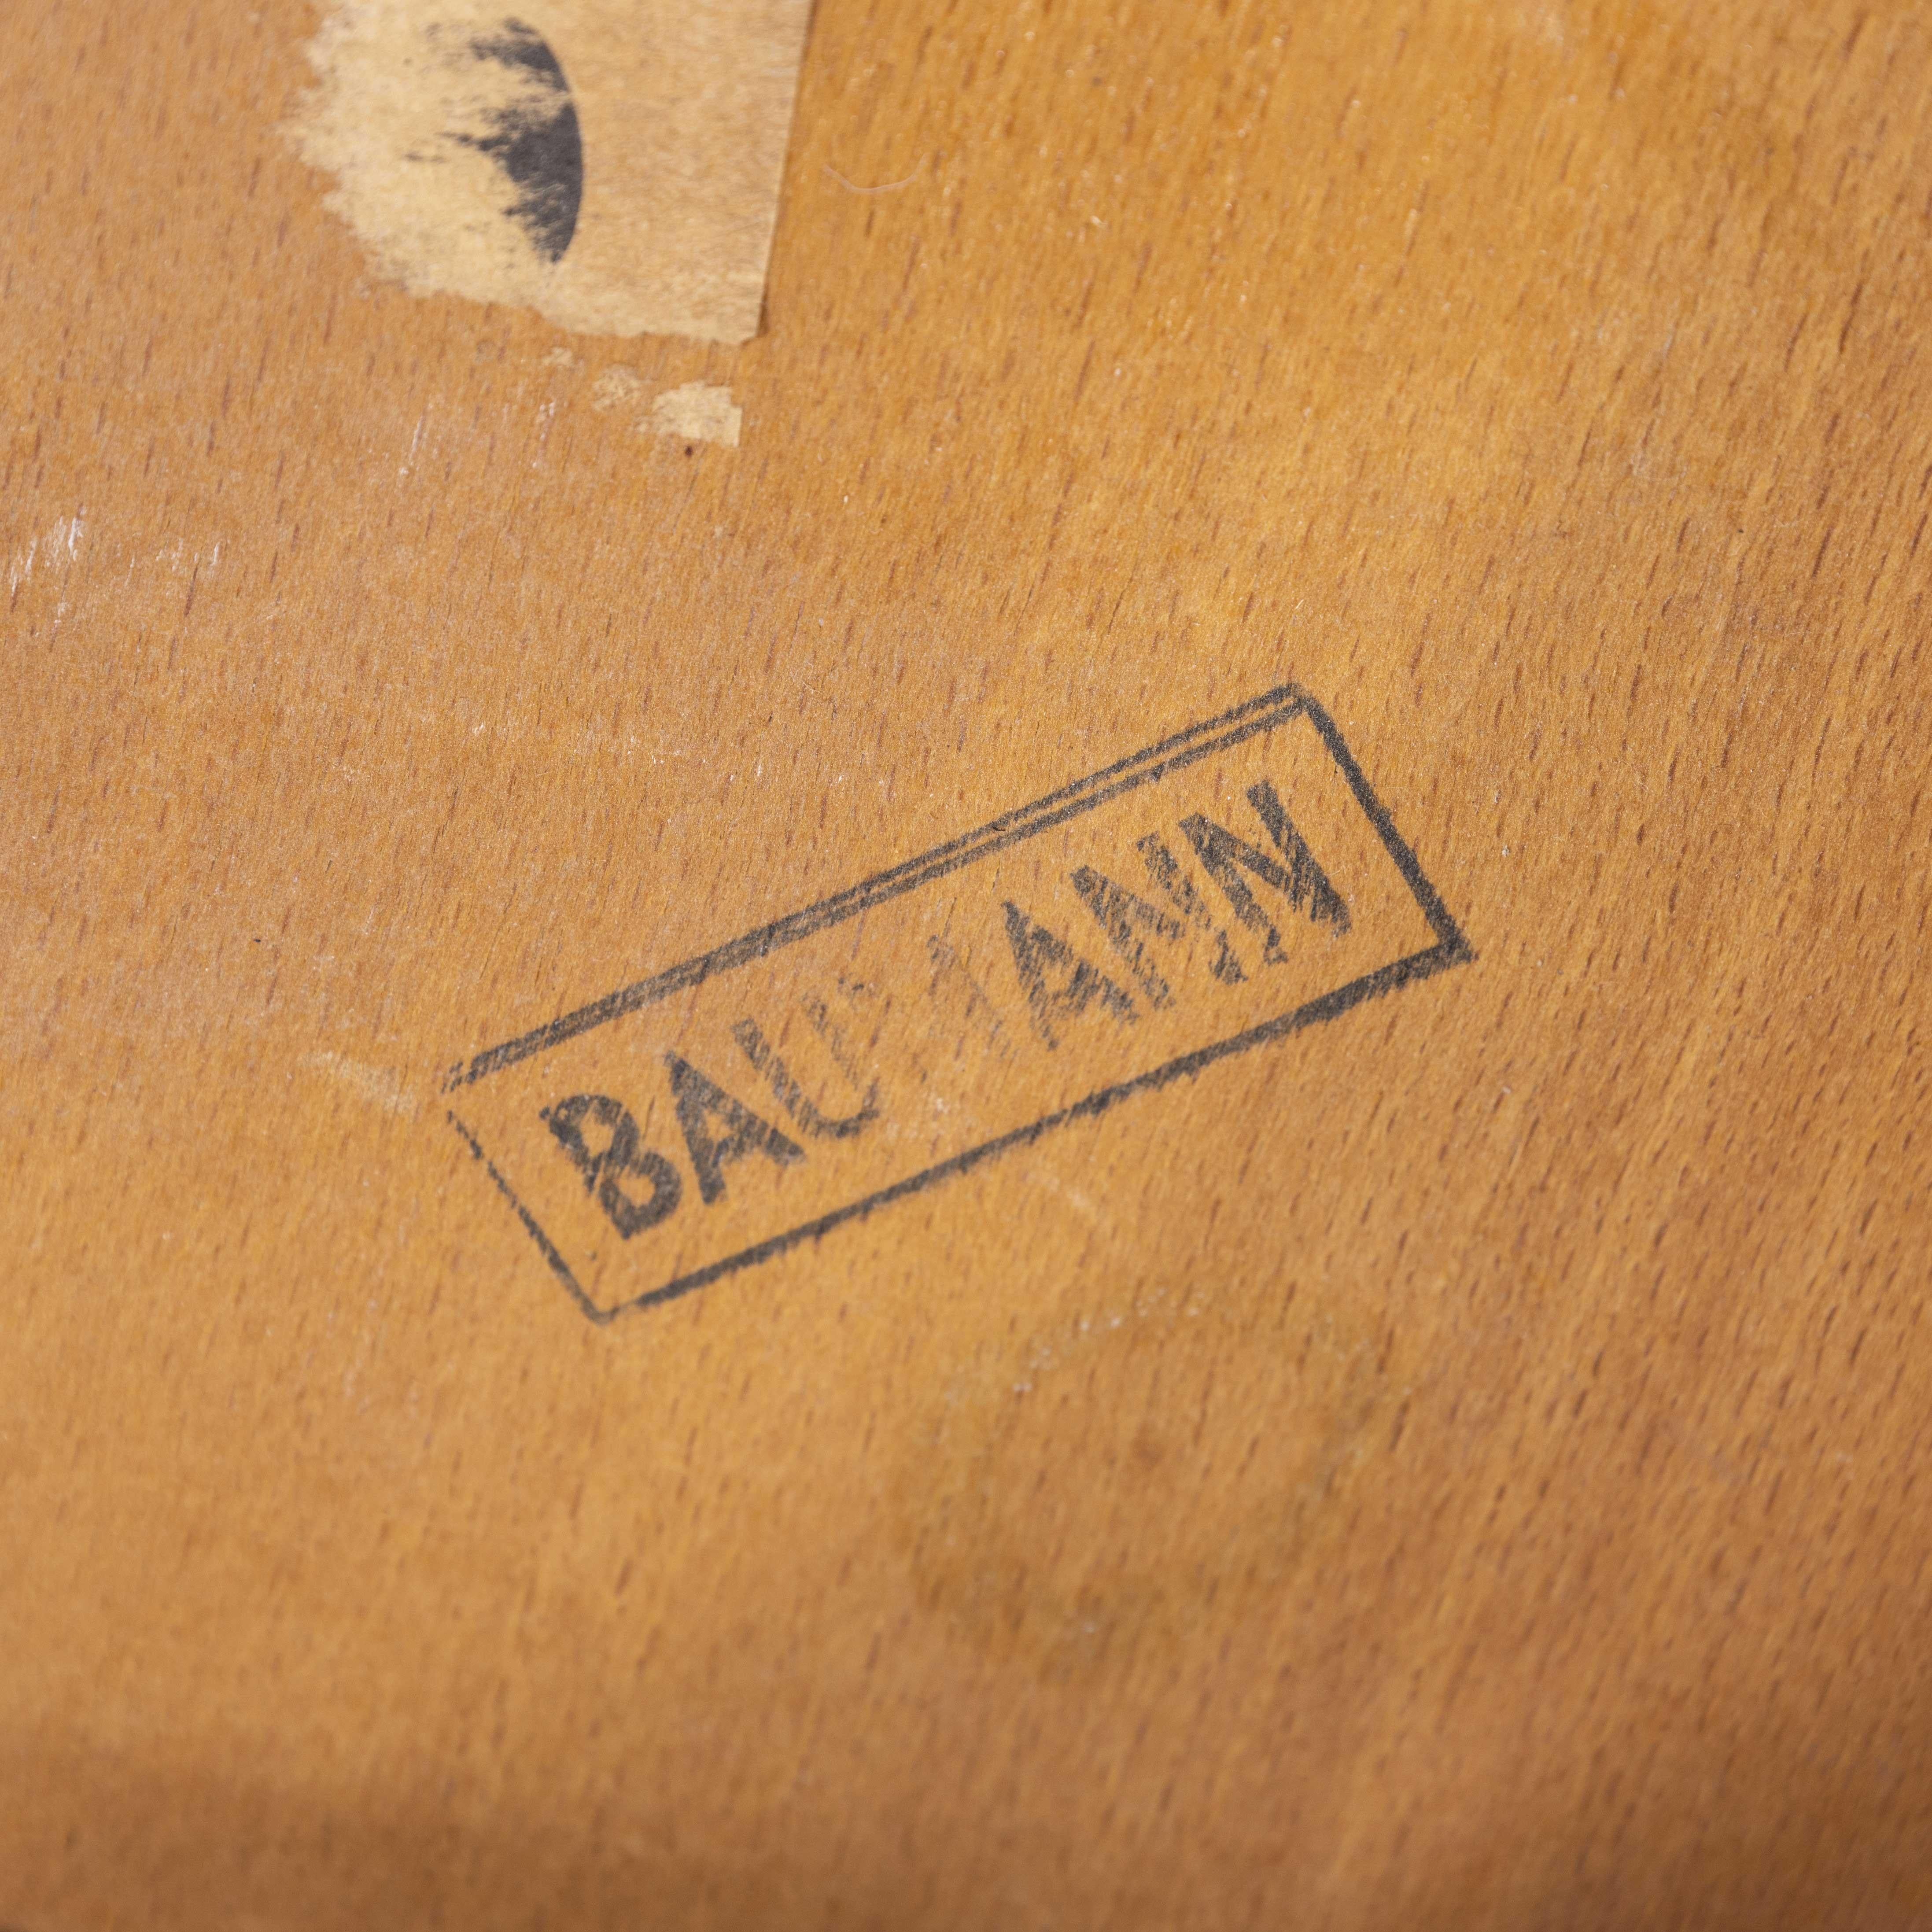 1950’s French Baumann blonde beech bentwood dining chairs – various quantities available

1950’s French Baumann blonde beech bentwood dining chairs – various quantities available (Model 1403). Baumann is a slightly off the radar French producer